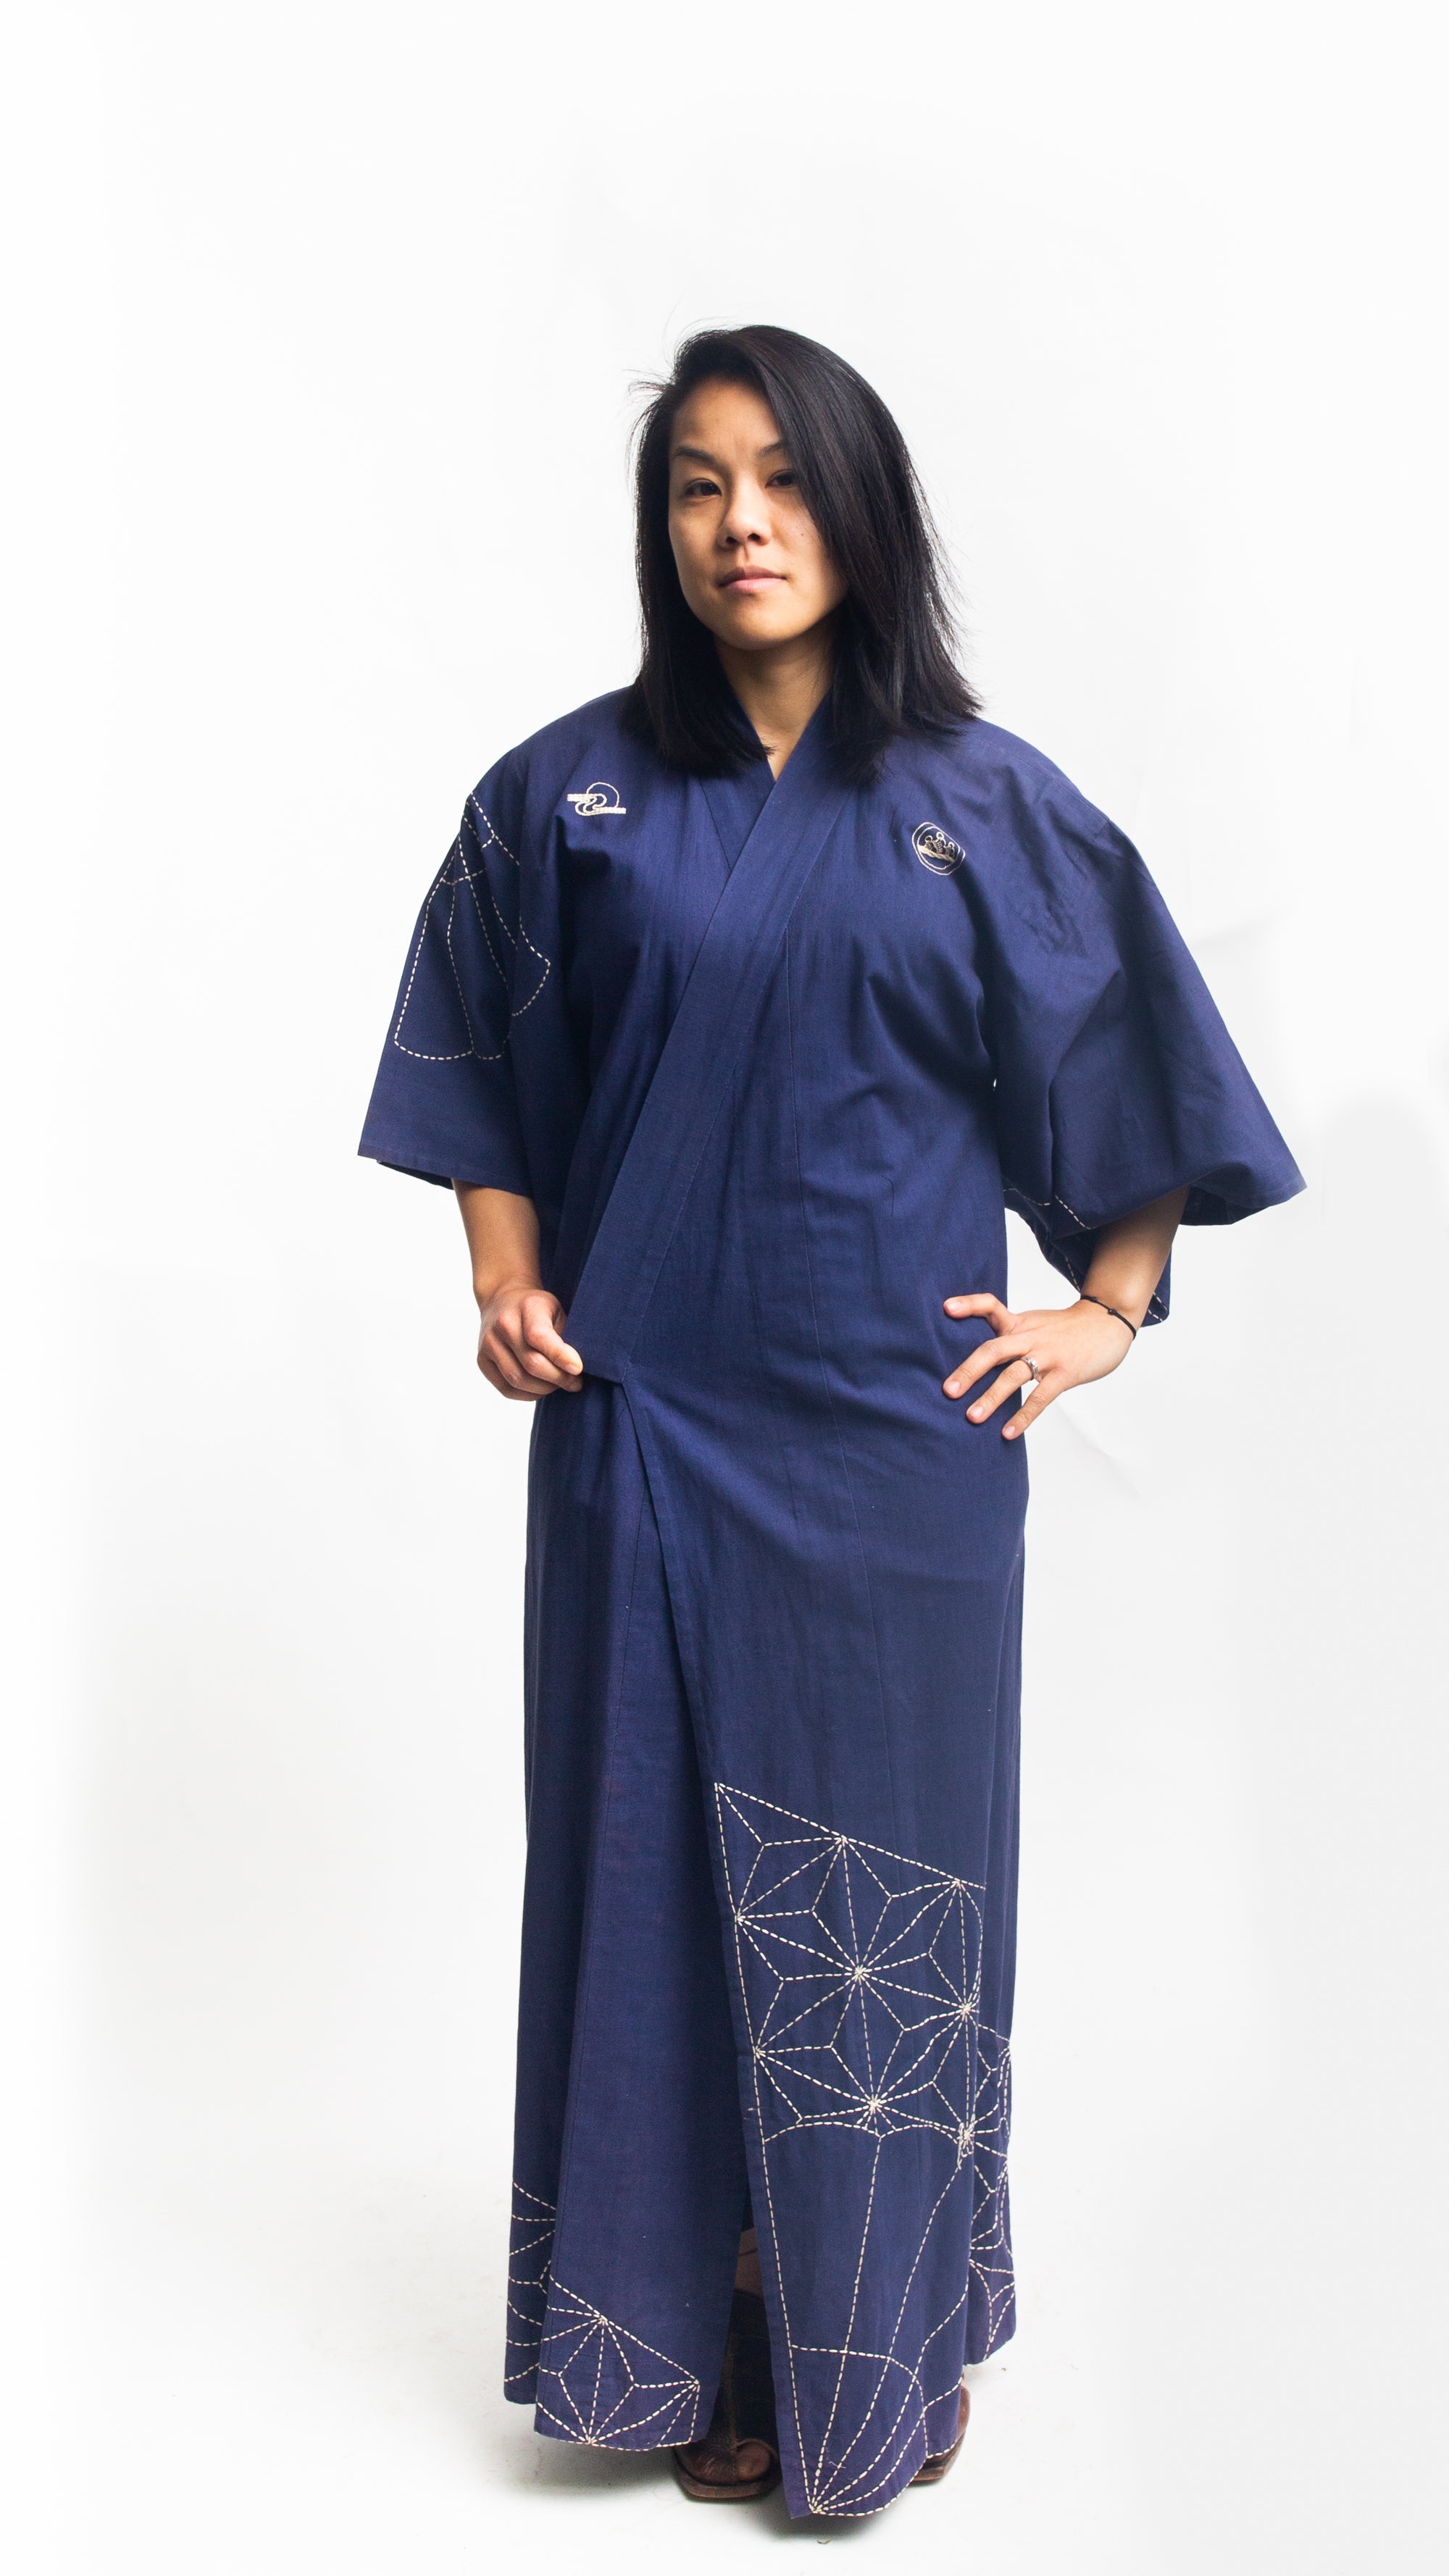 Asian American woman wearing a navy embroidered kimono standing in front of a white background.